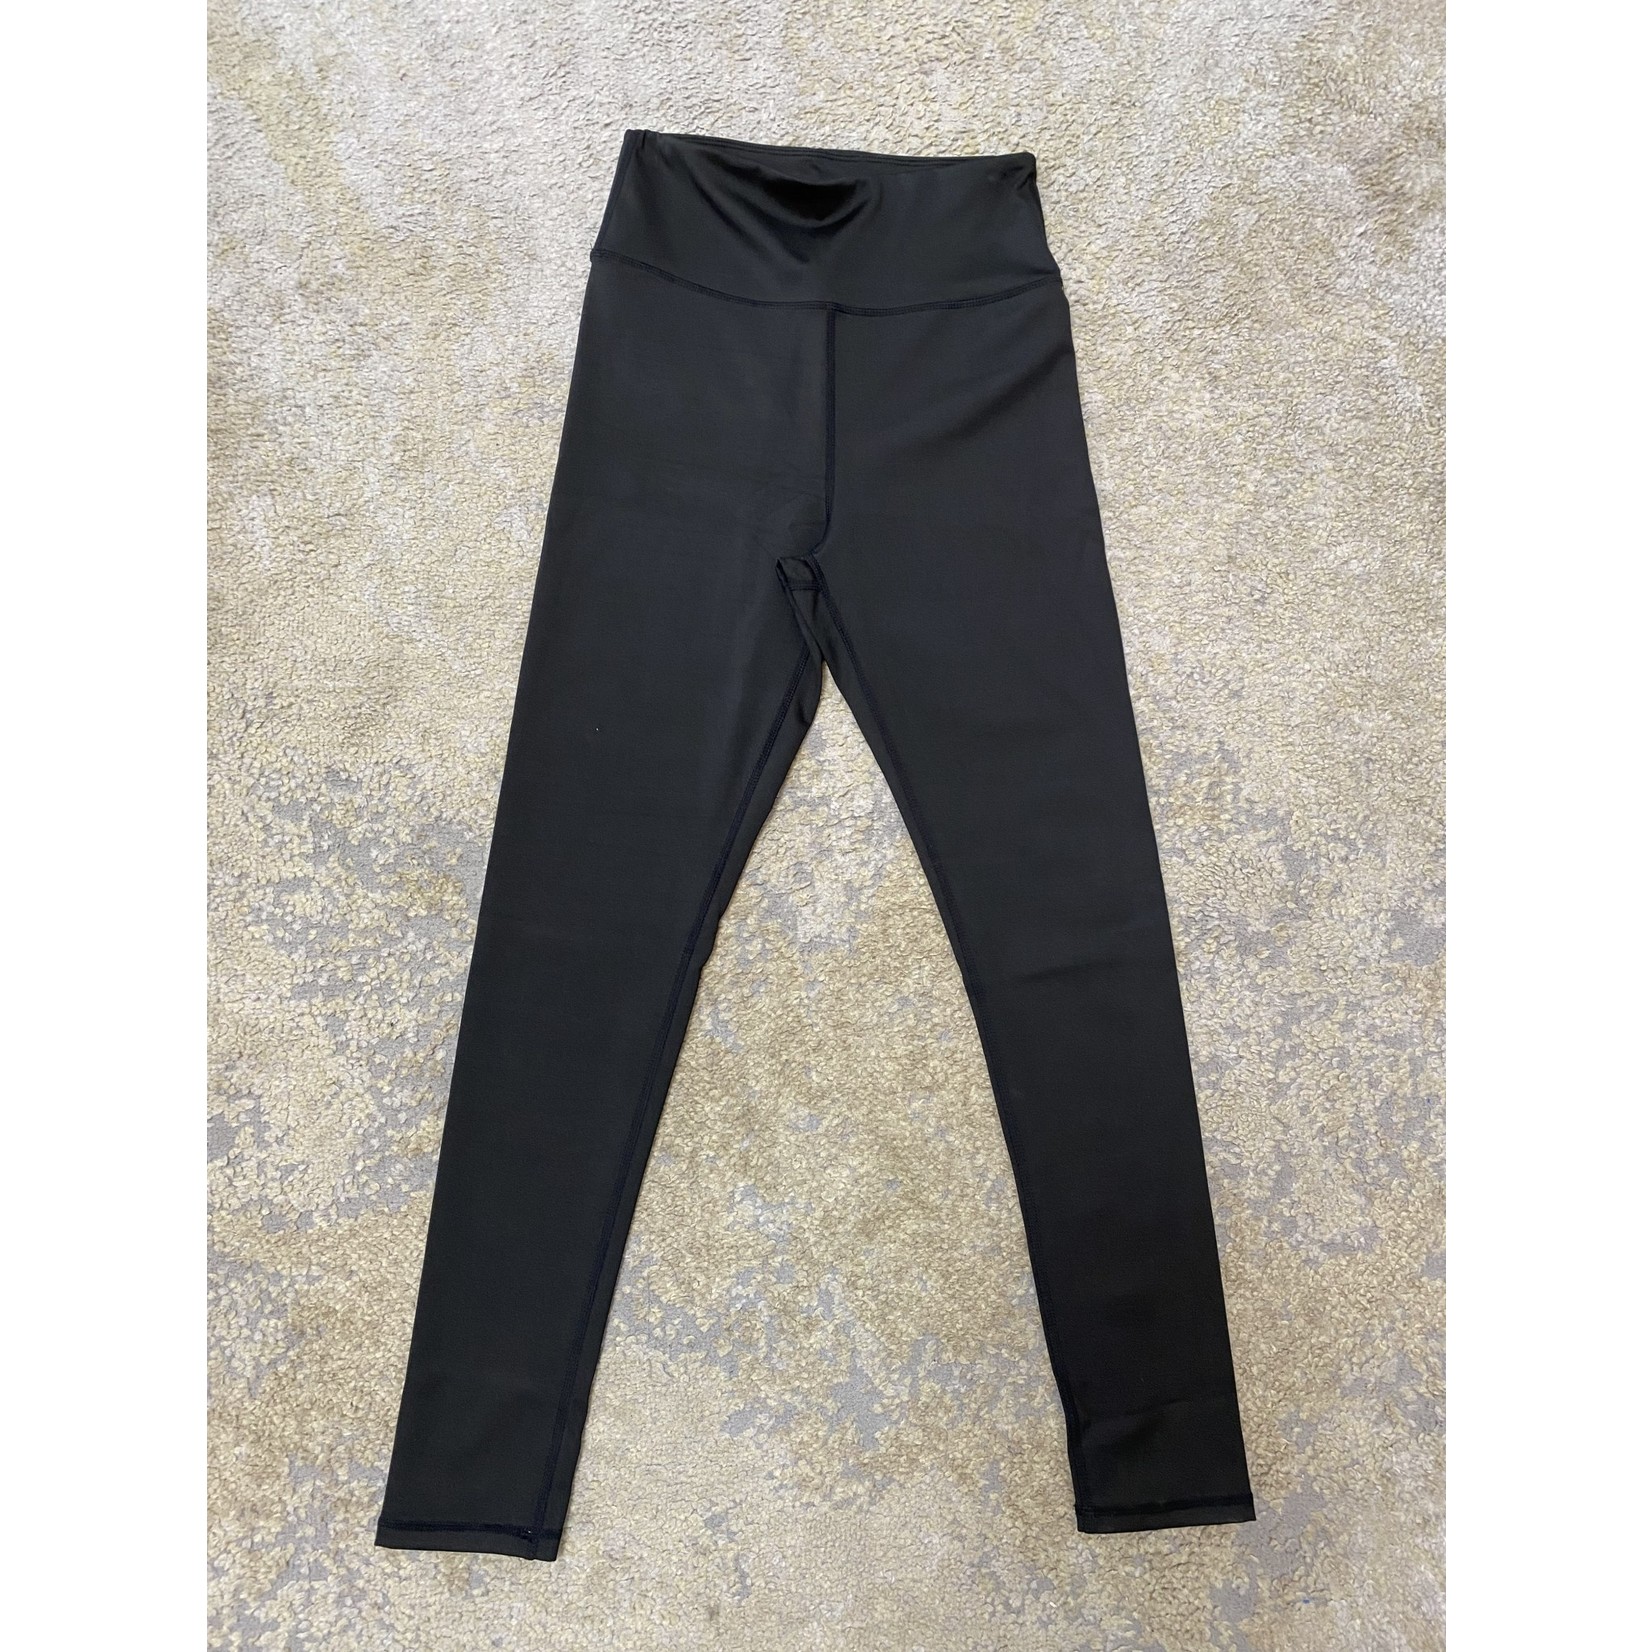 Summer 10 Black Leggings with Stitching